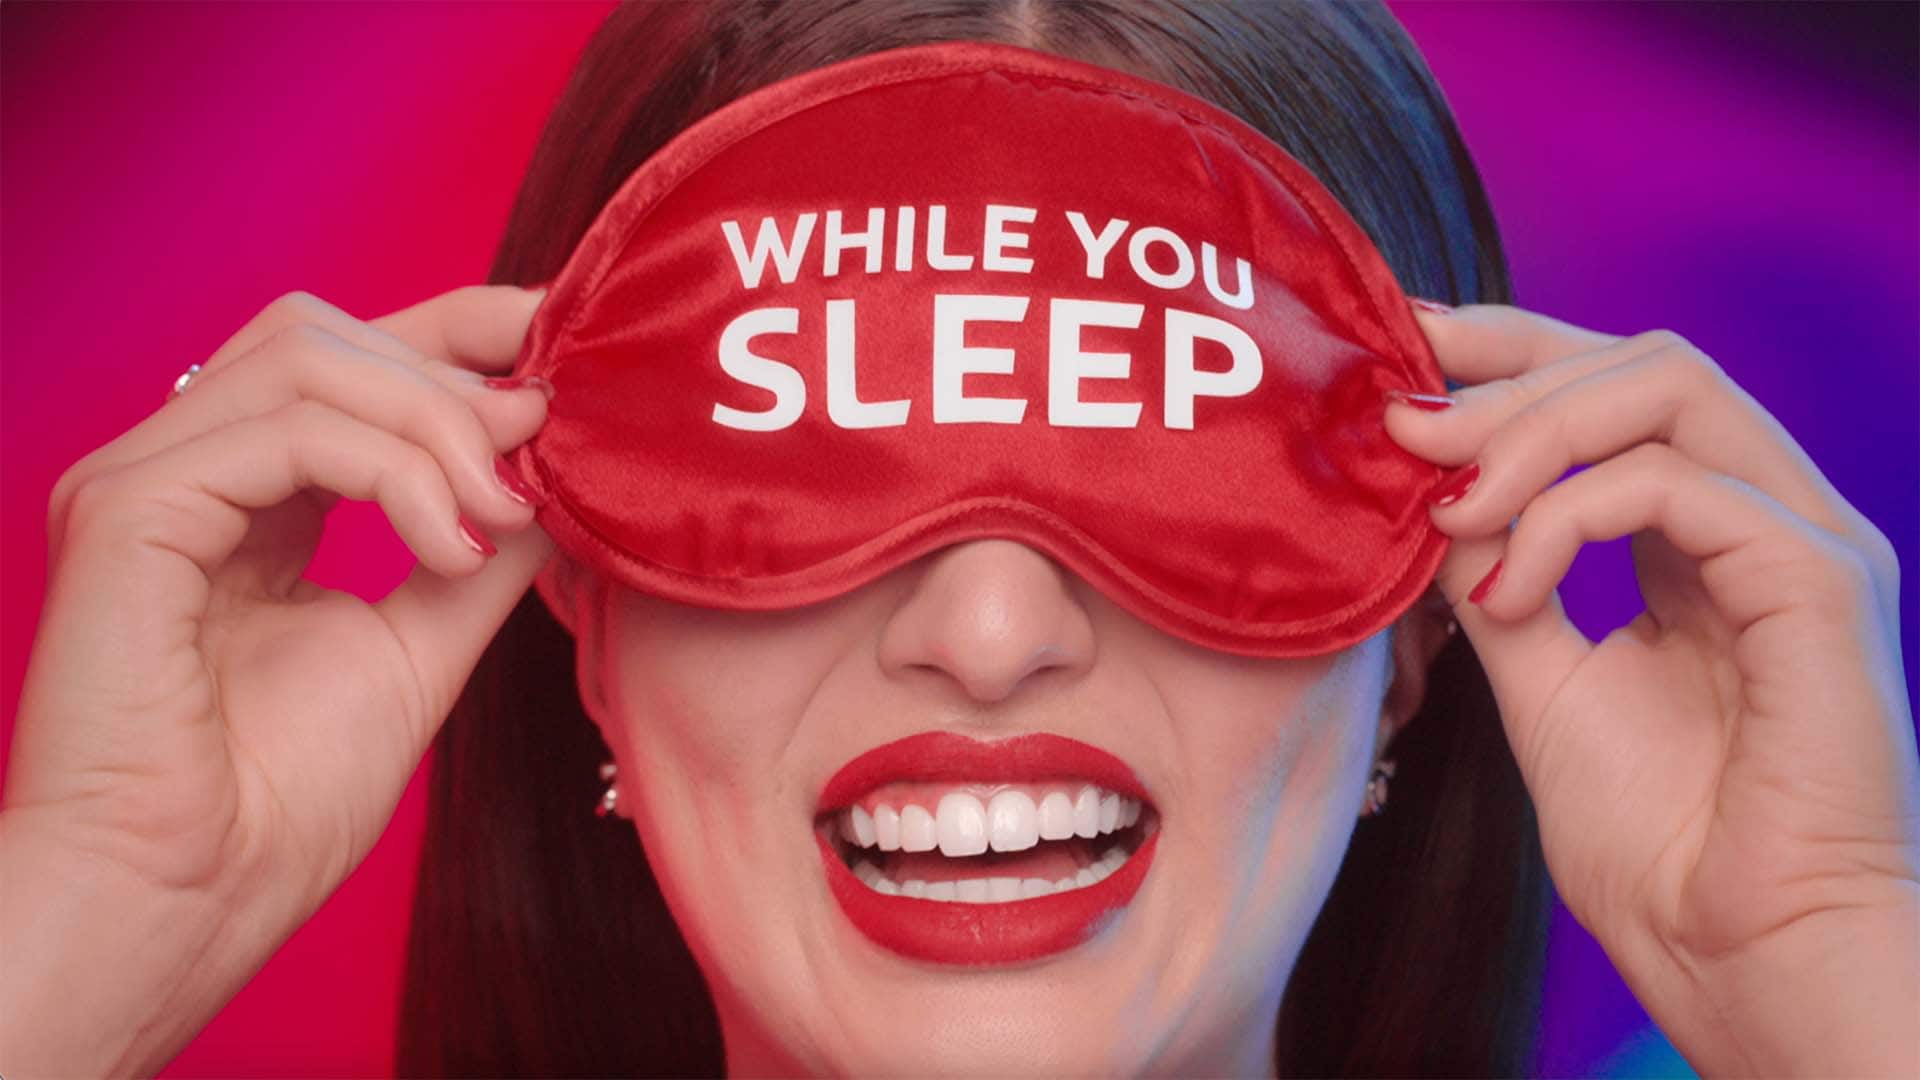 Ann smiling loudly while holding on a eye mask with the word while you sleep on it